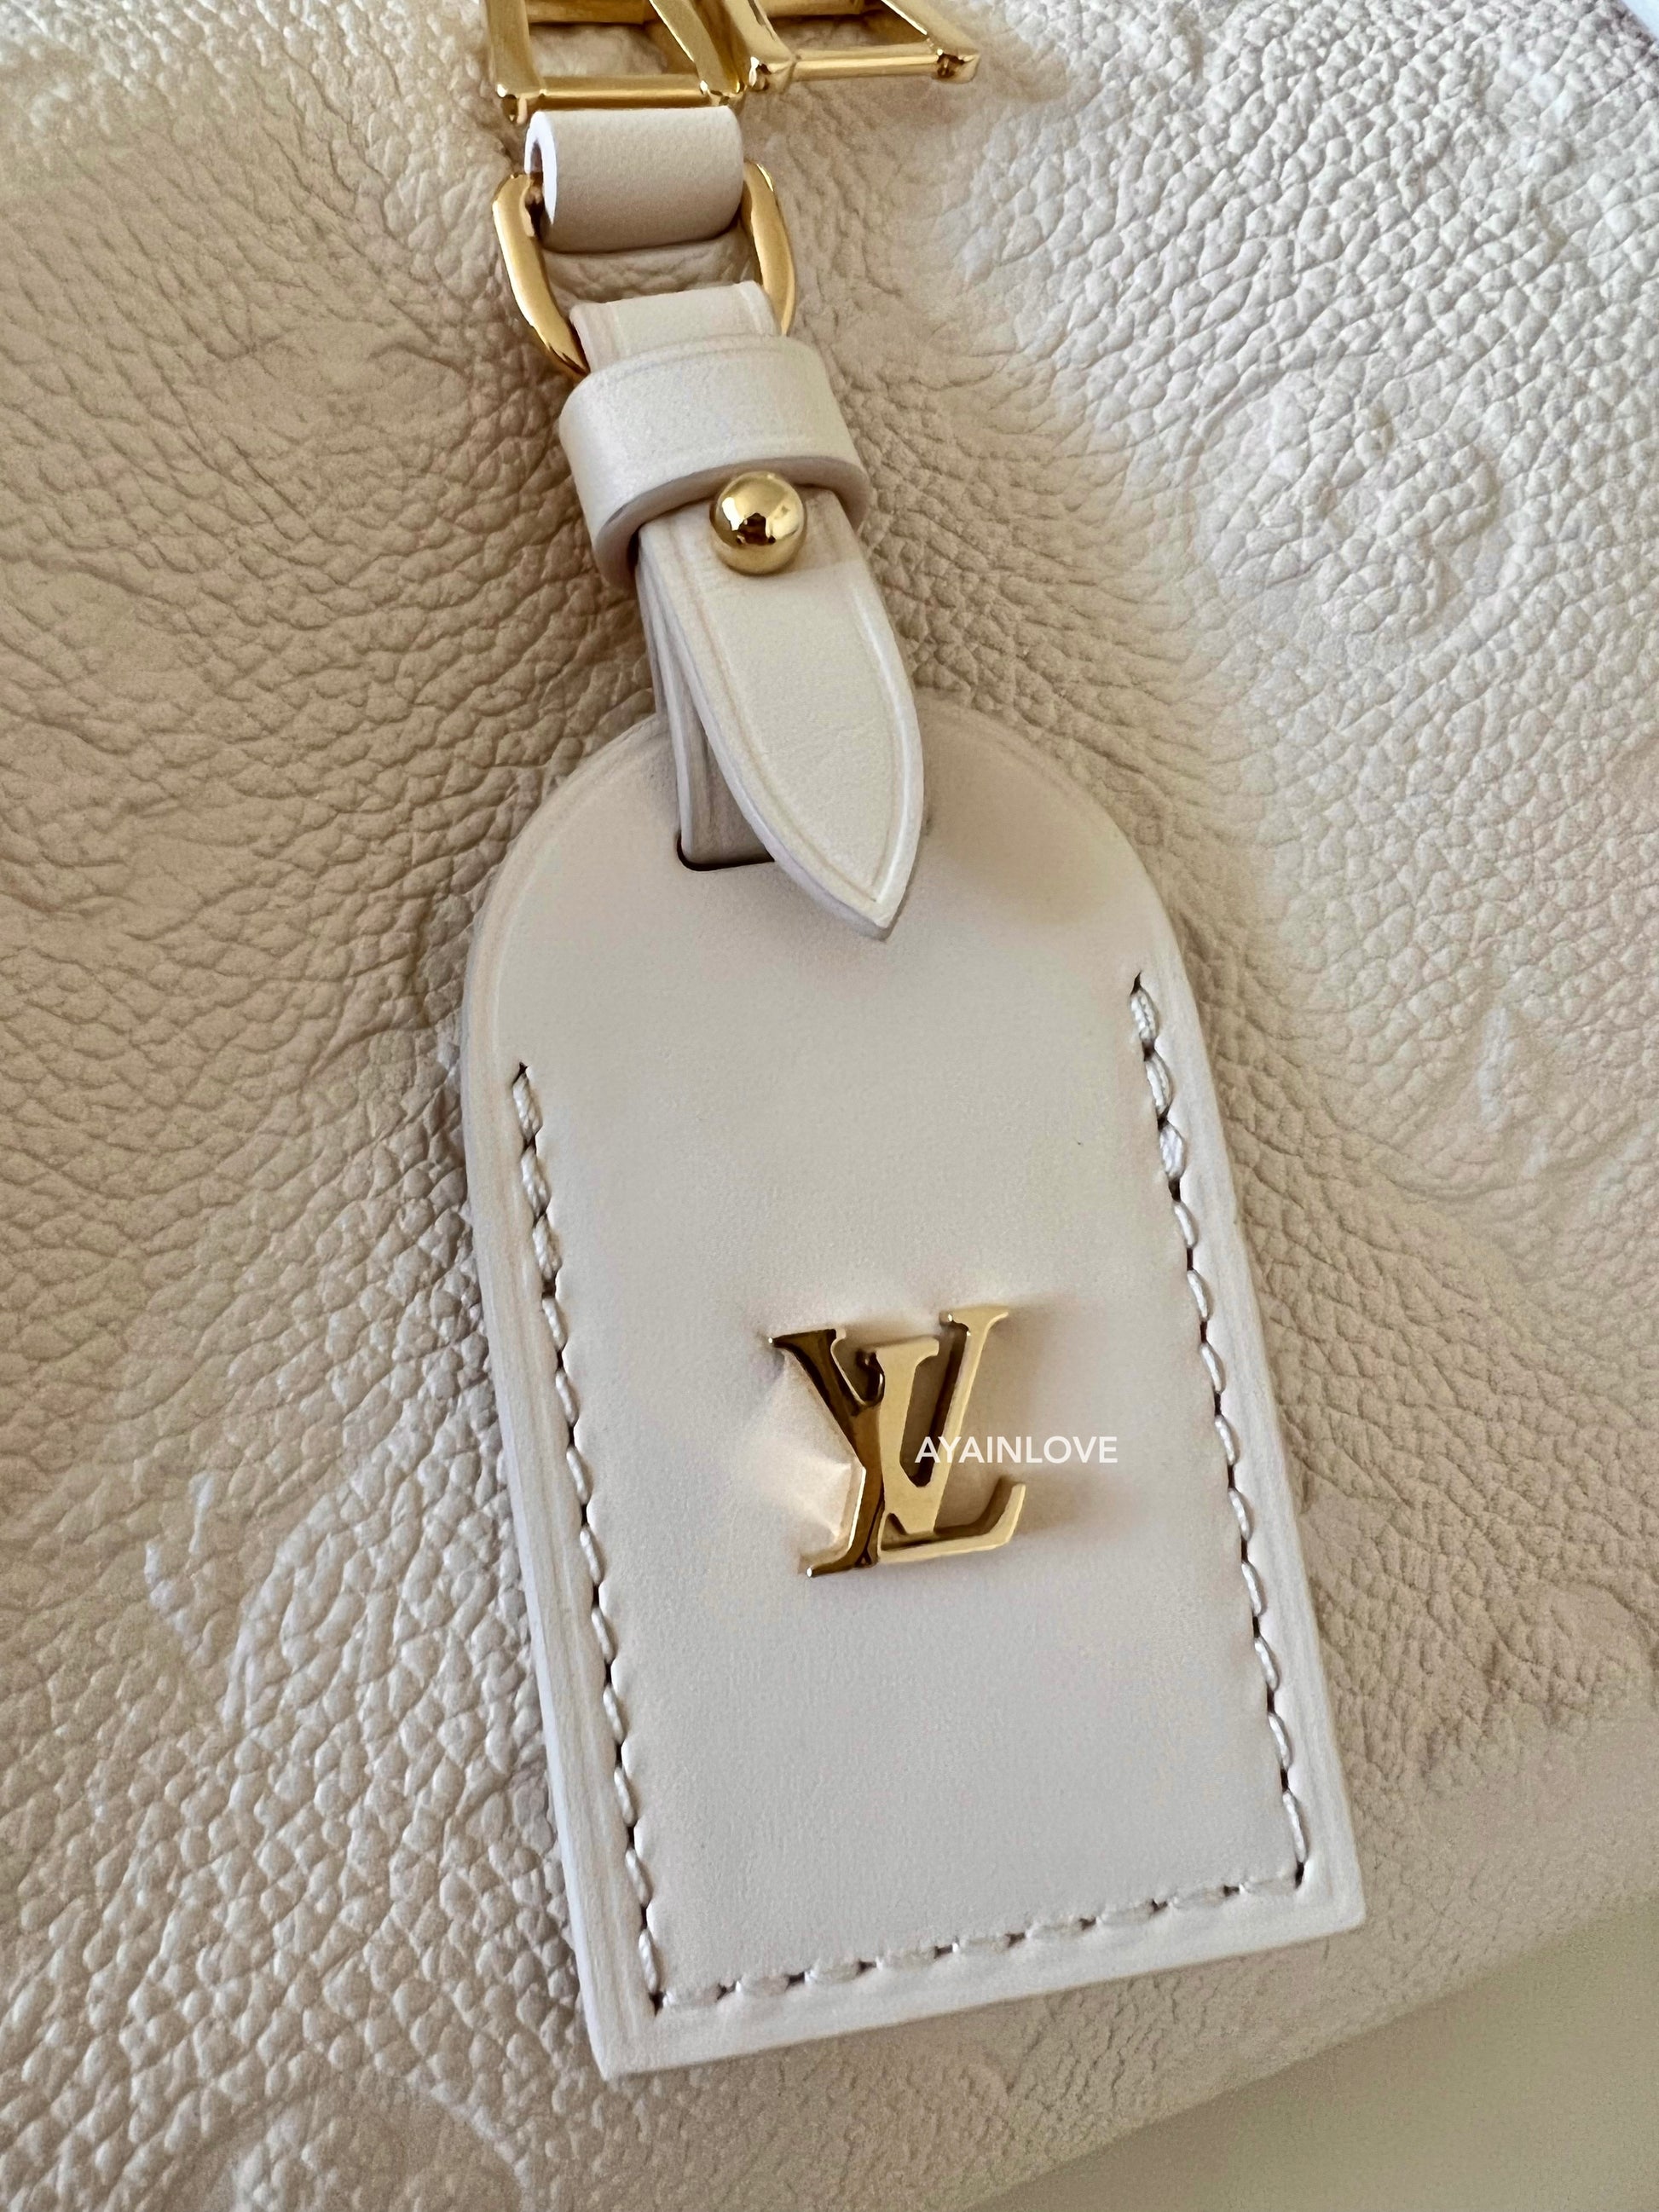 PETITE MALLE SOUPLE MONOGRAM EMPRINTE CRÈME GOLD HARDWARE *NEW* – AYAINLOVE  CURATED LUXURIES